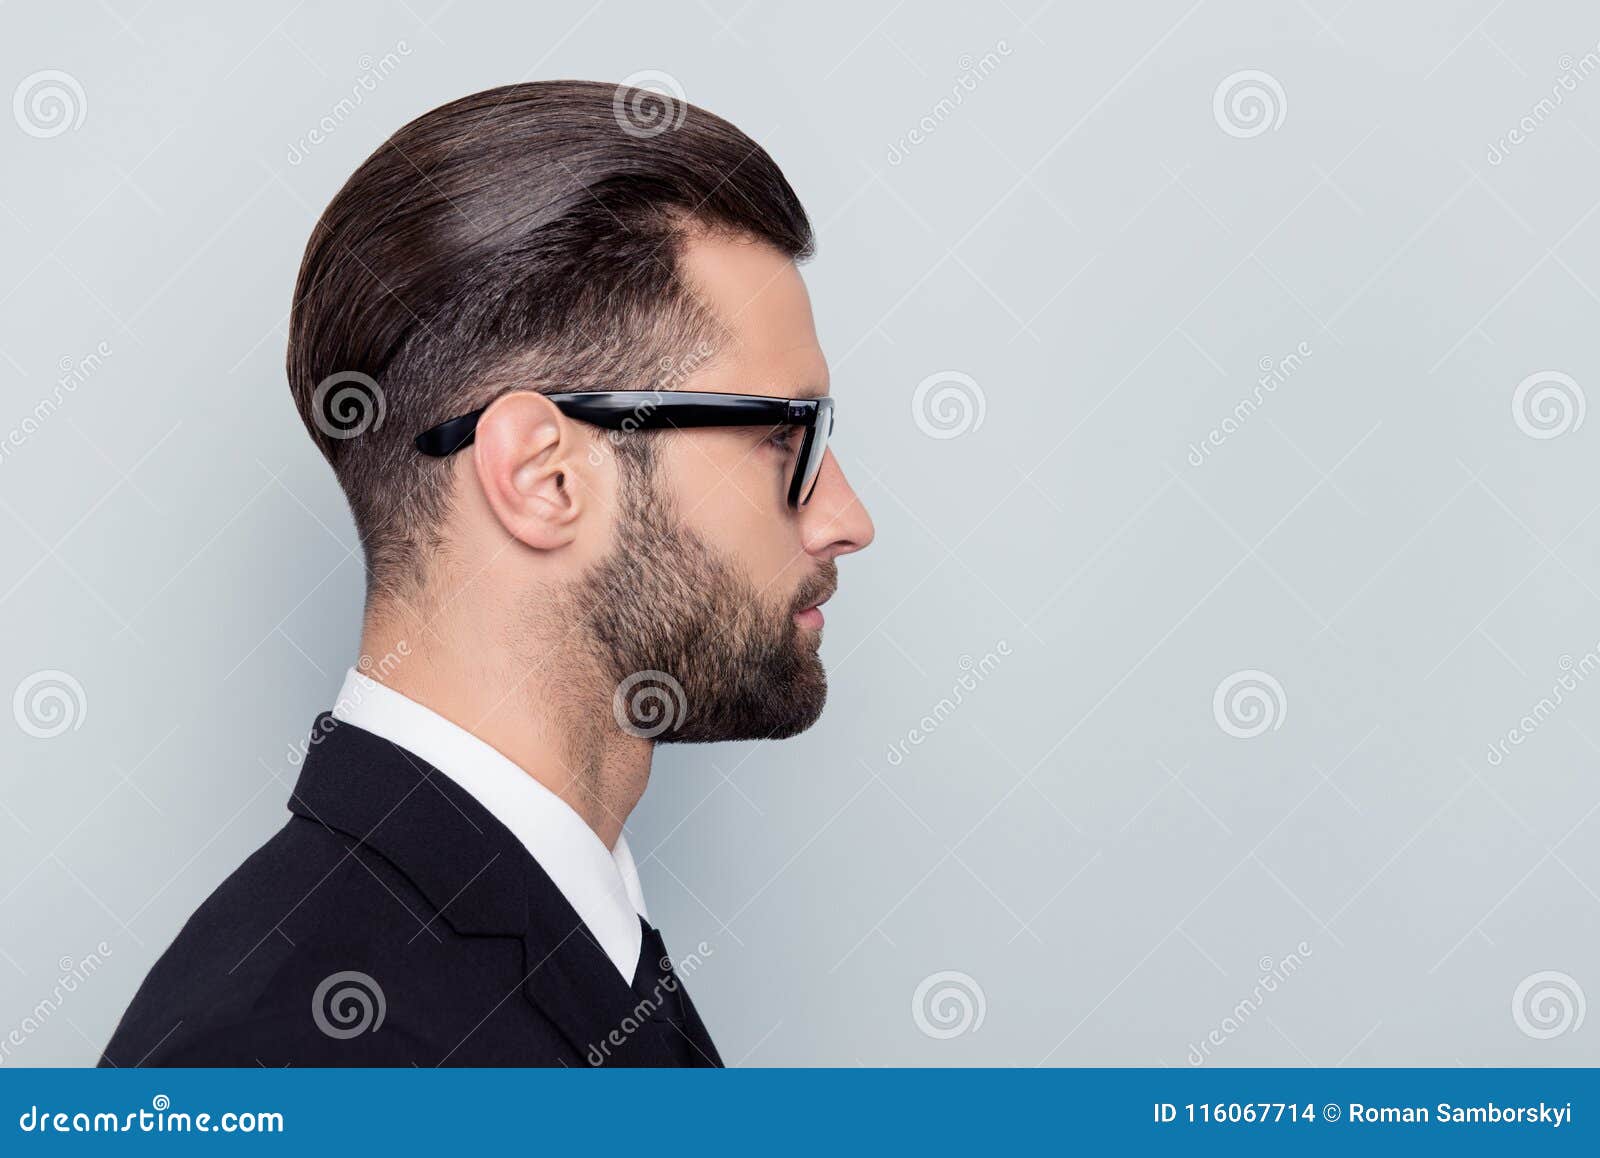 half-faced profile side view close up portrait of serious focused handsome attractive style stylish modern masculine guy with